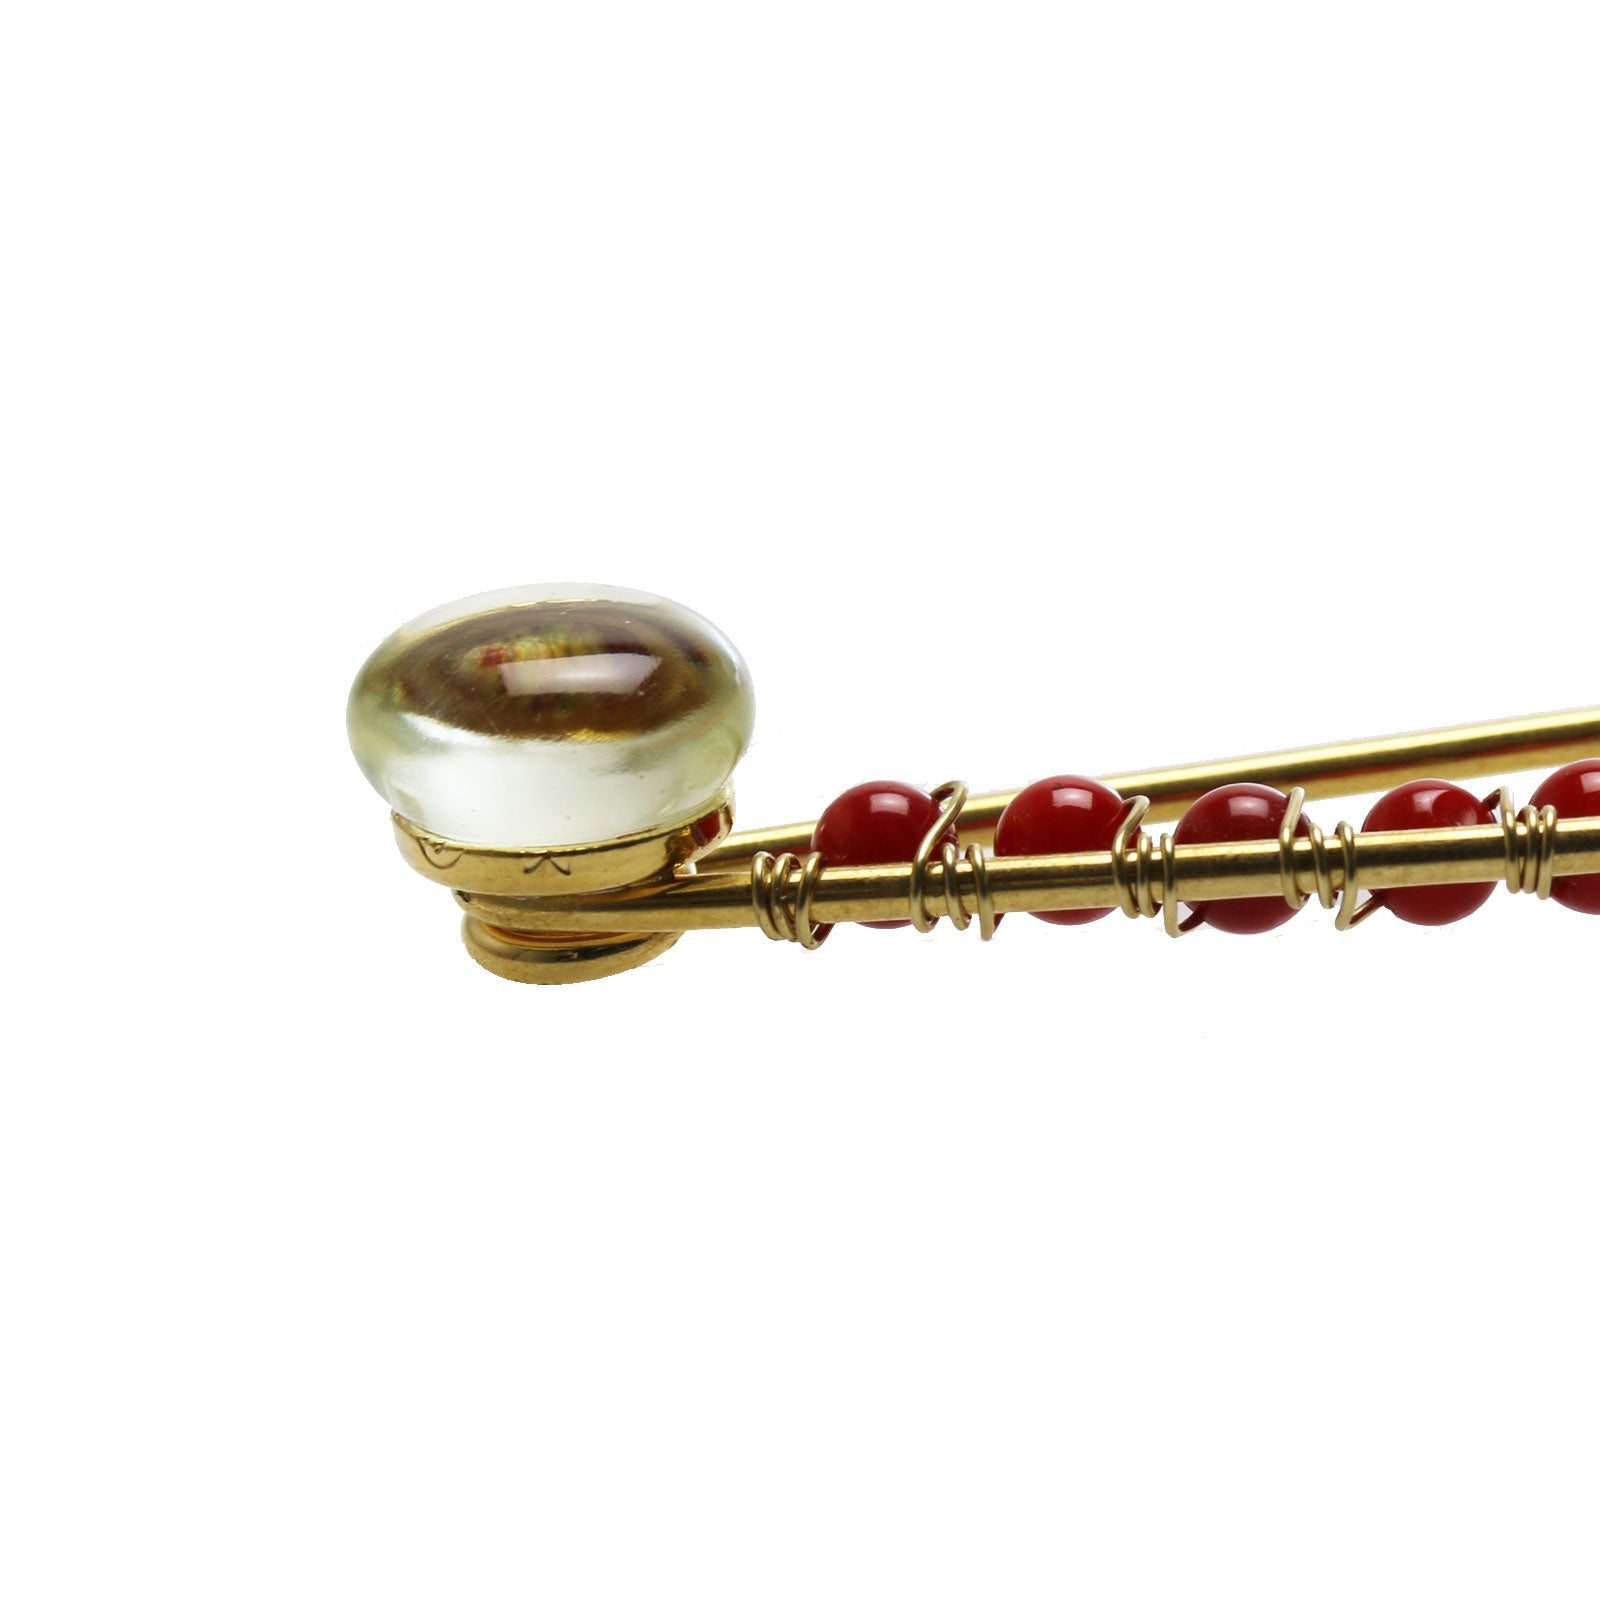 Fancy Safety Pin Coral Red Gold TAMARUSAN